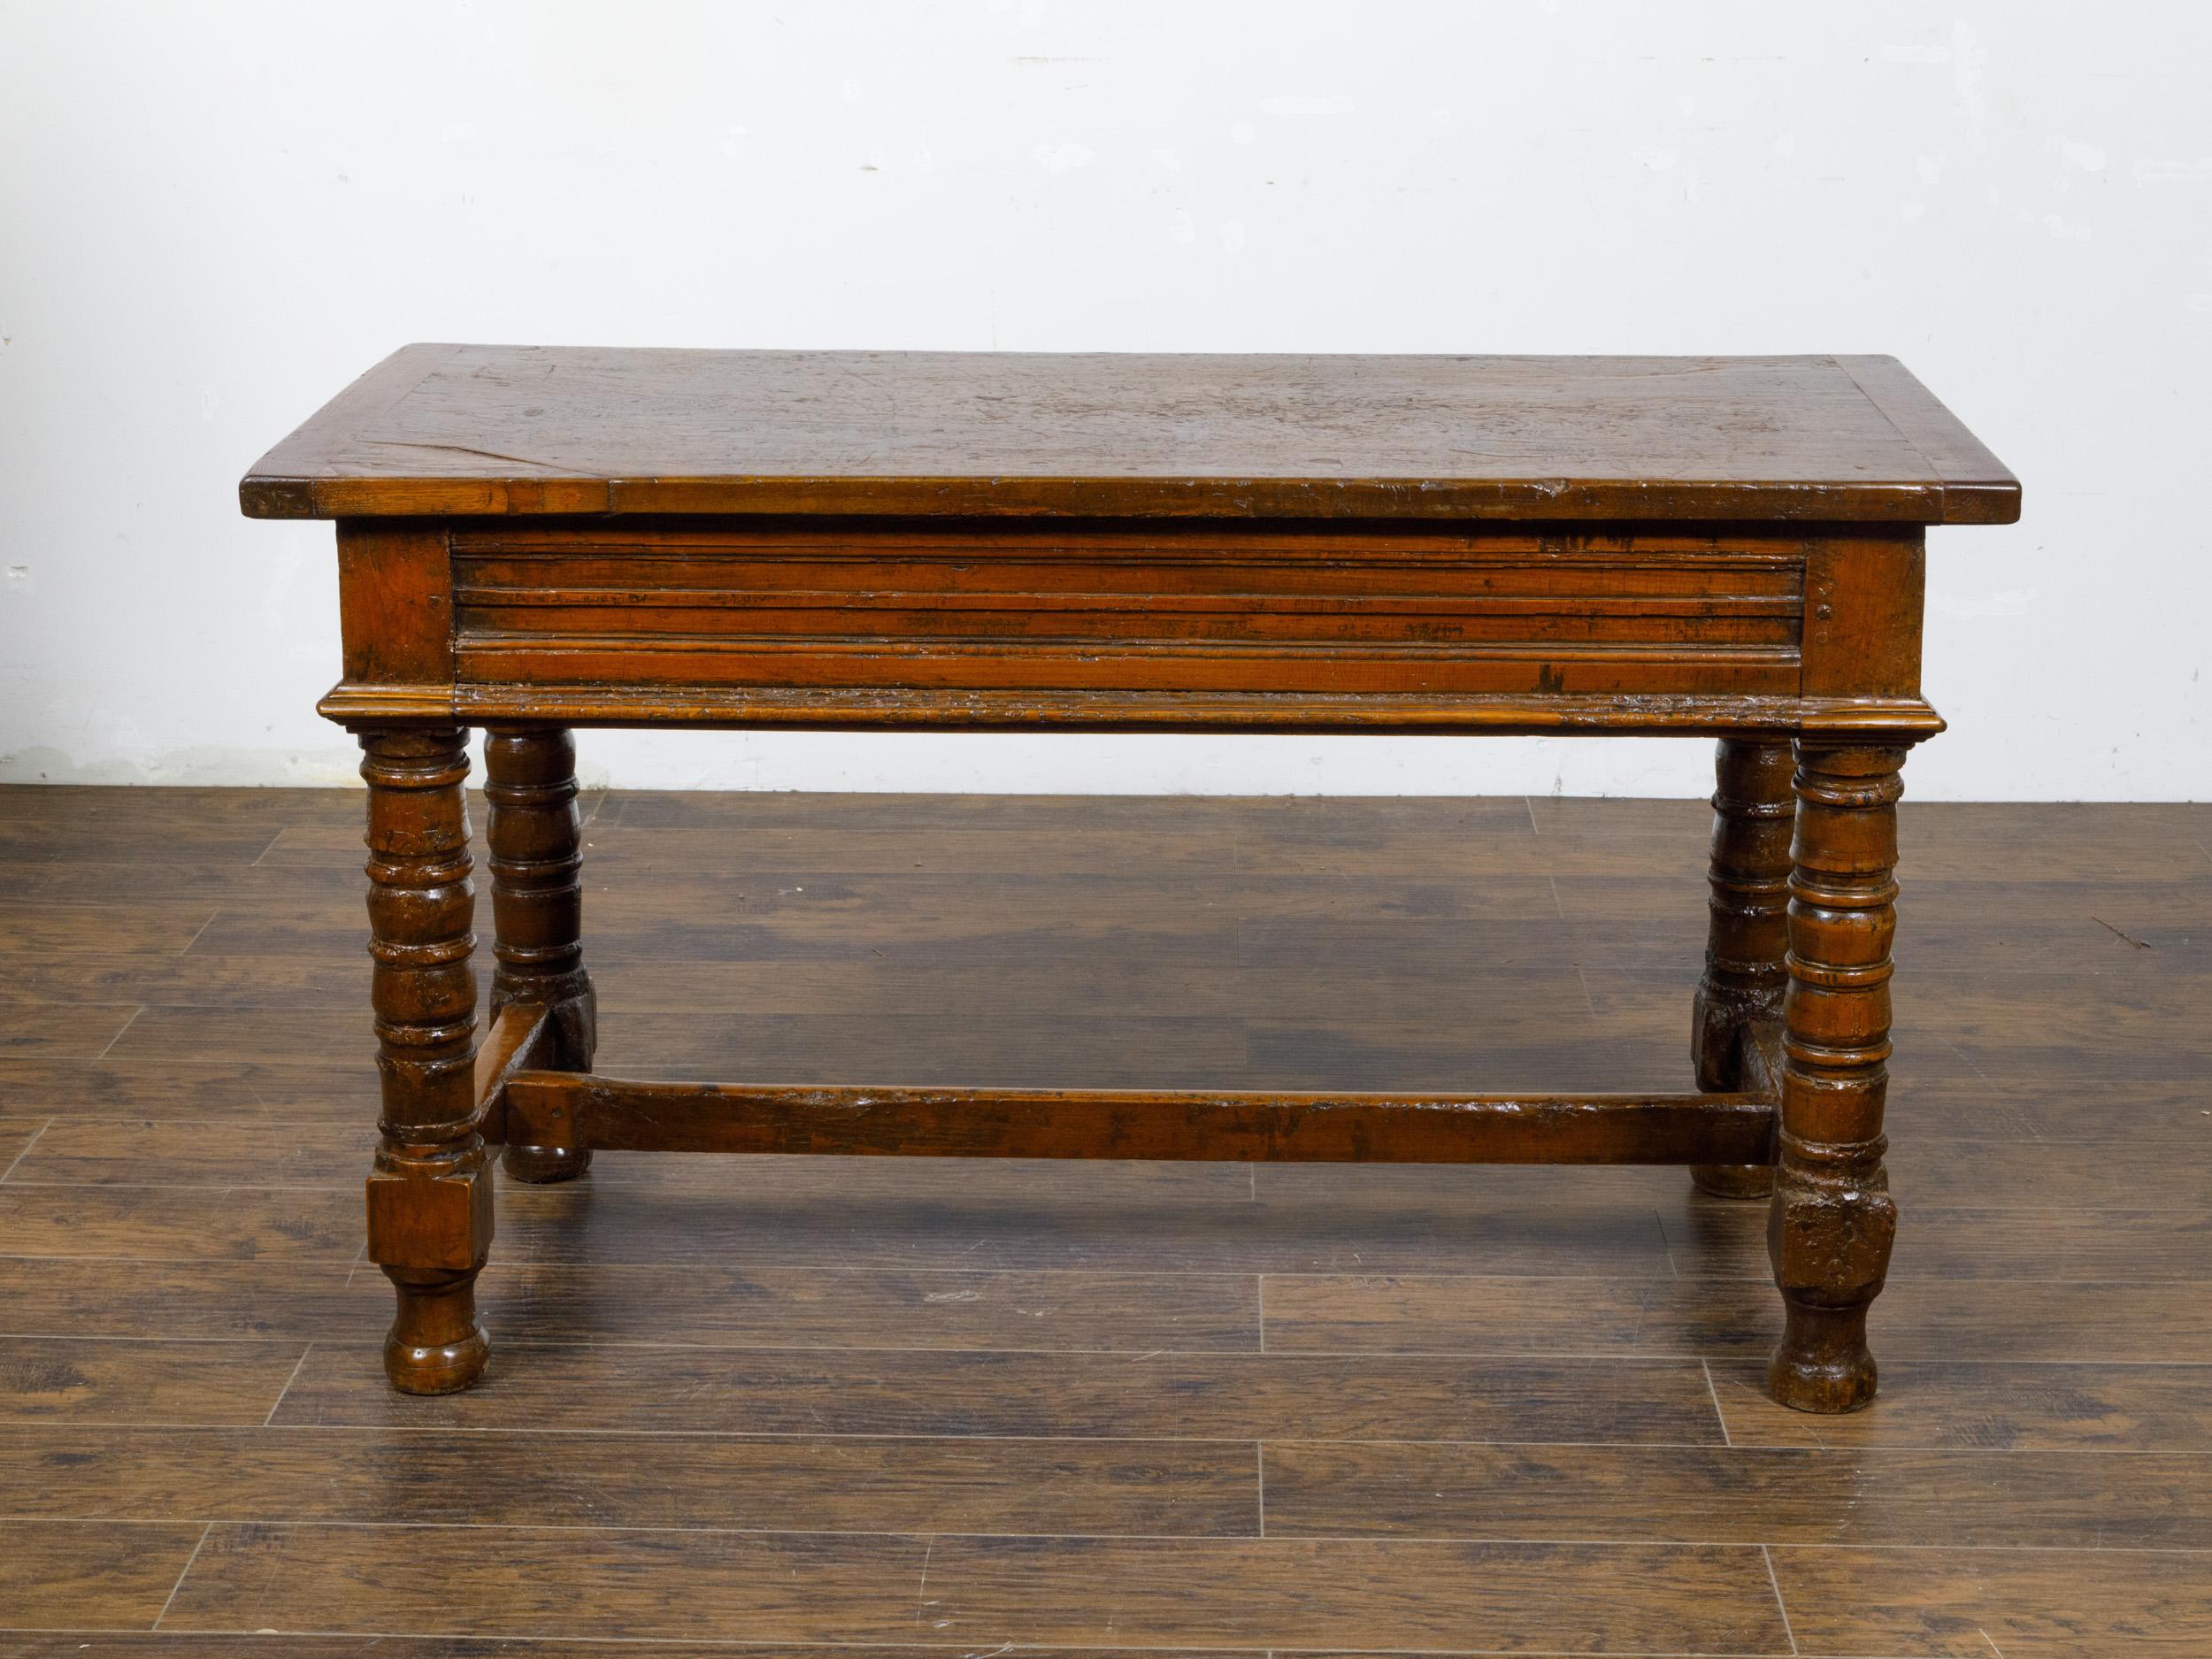 18th Century Spanish Walnut Console Table with Carved Drawers and Baluster Legs For Sale 1